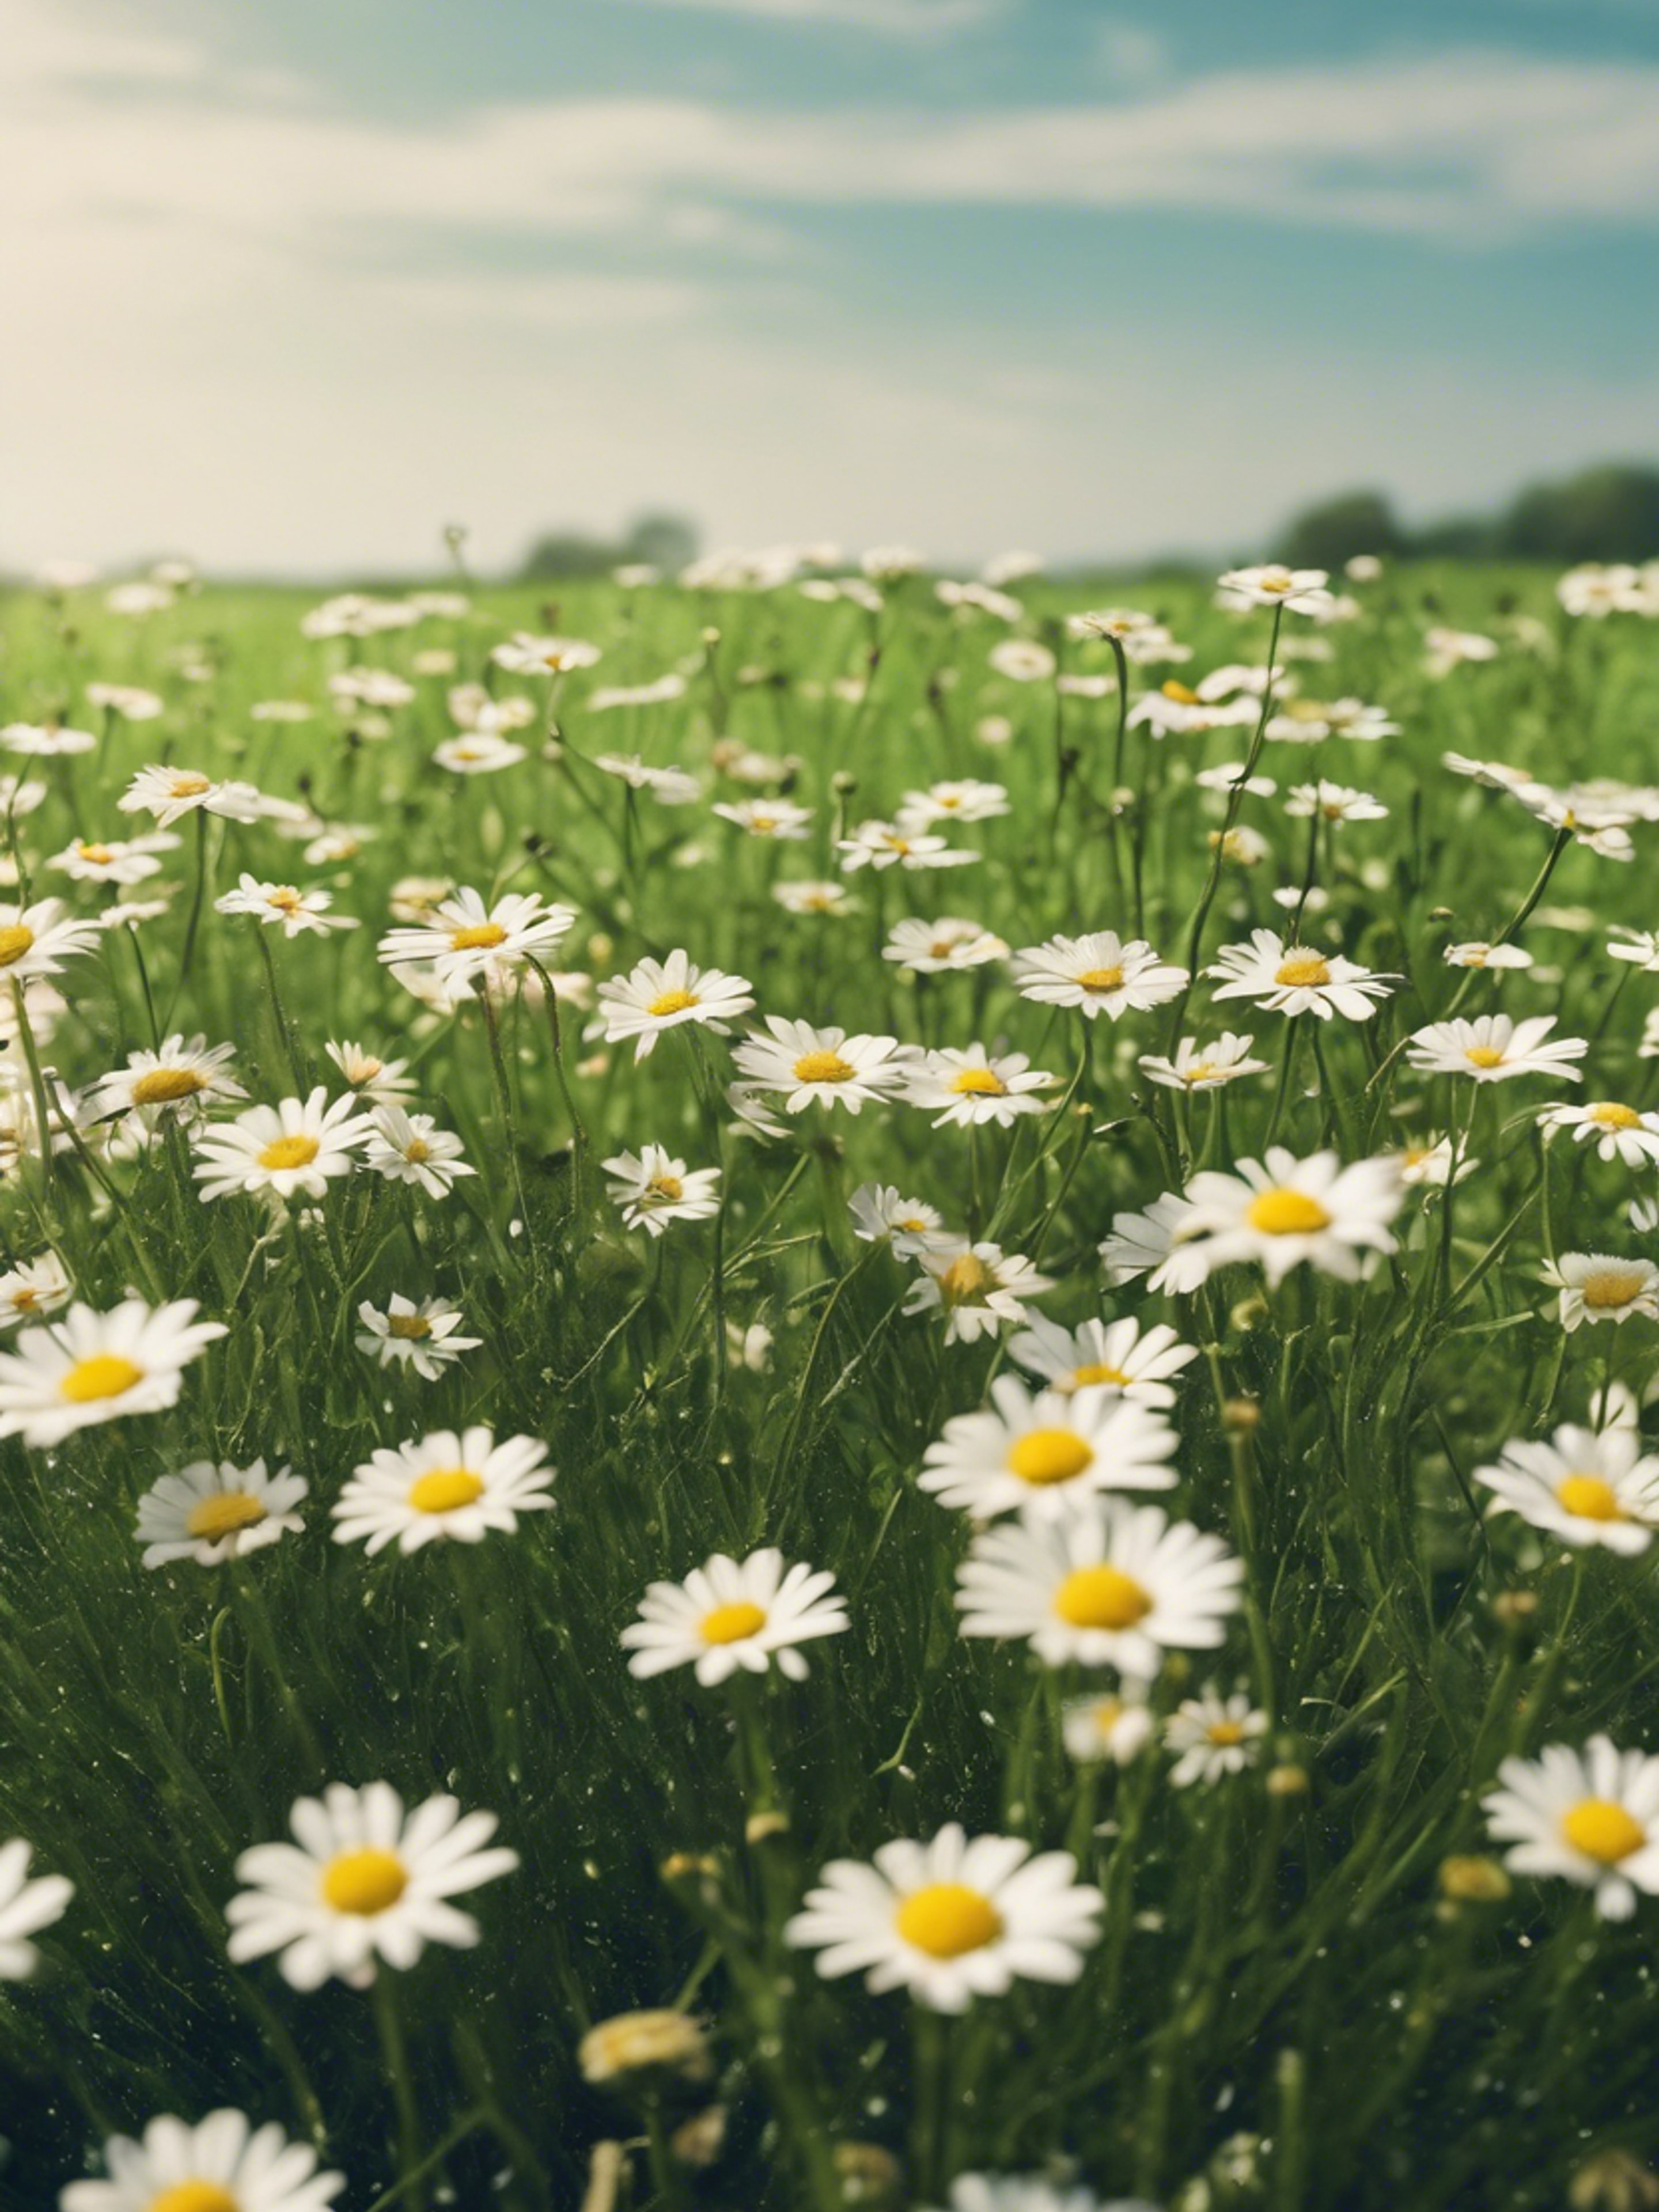 A cool green field sprinkled with daisies under a morning sky. Tapeta[e270184600e04e908453]